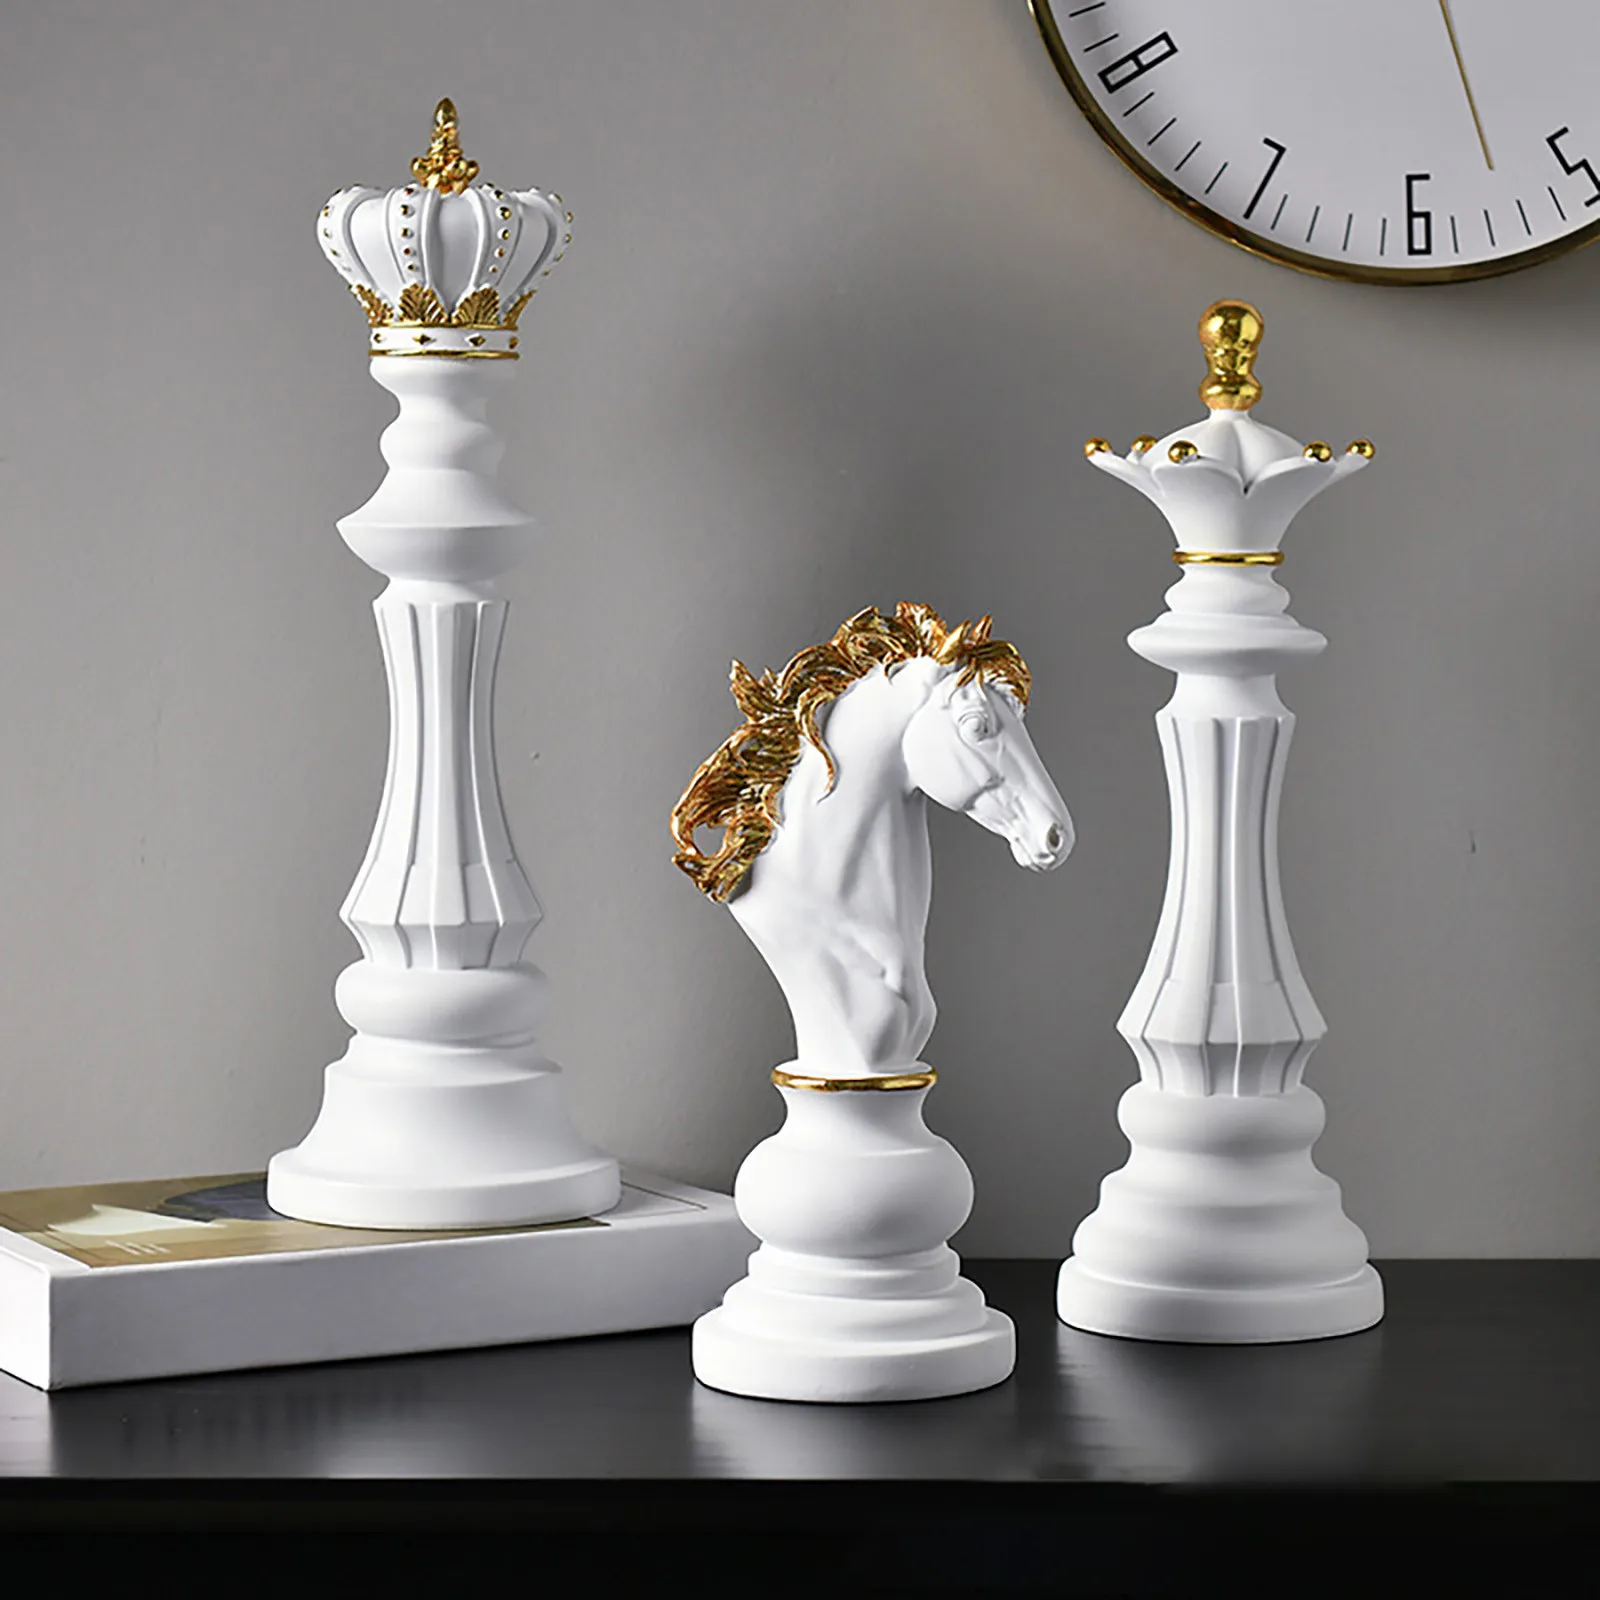 

Resin Chess Figurine King Queen Knight Statue Sculpture Ornament Collectible Figurines Craft Furnishing Decor for Home Office